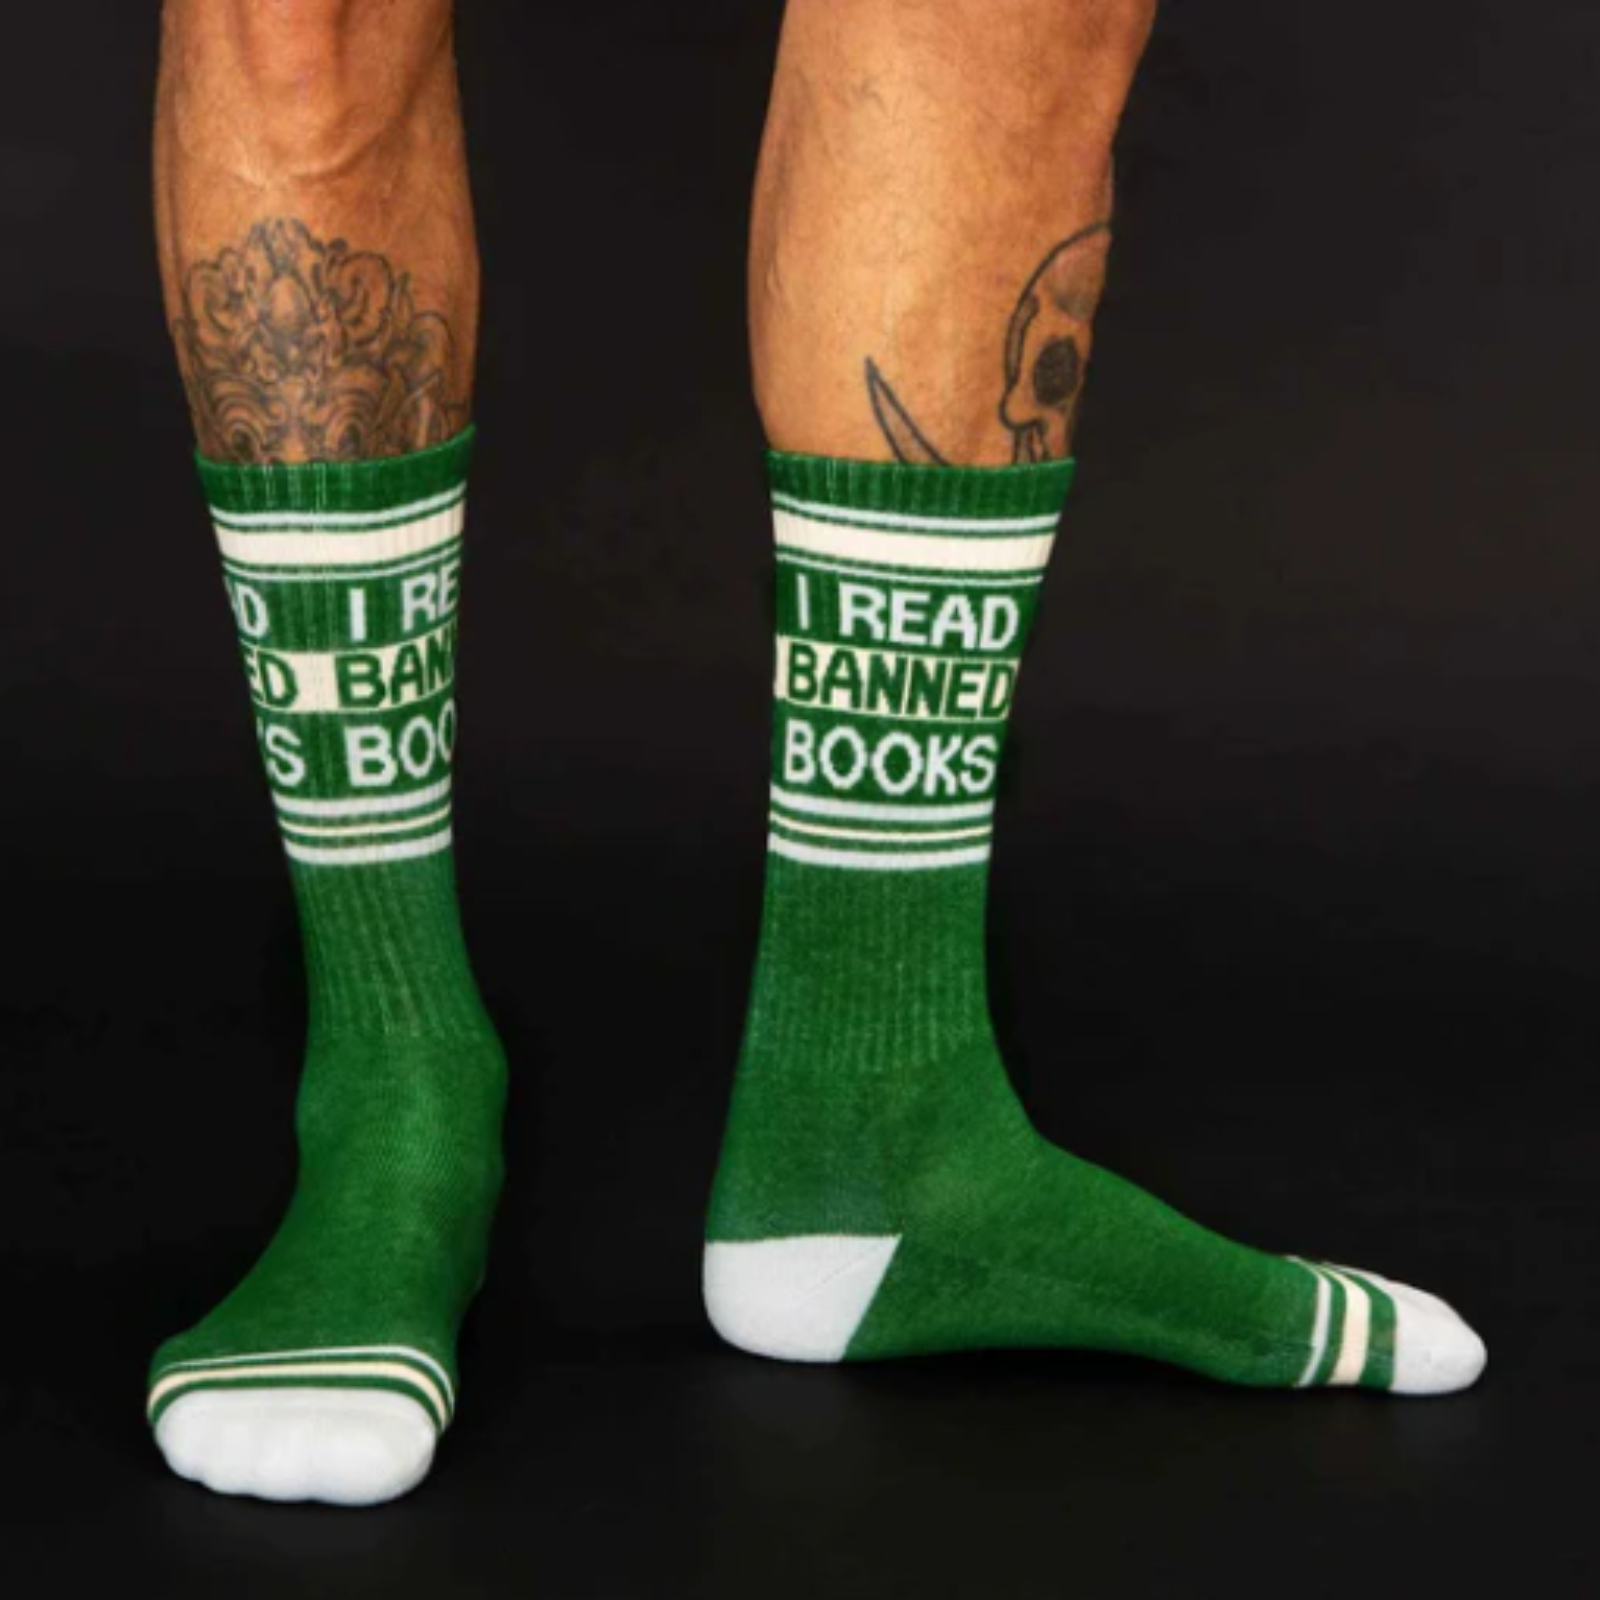 Gumball Poodle I Read Banned Books women's and men's crew sock featuring green sock with "I Read Banned Books" at top. Socks worn by model. 